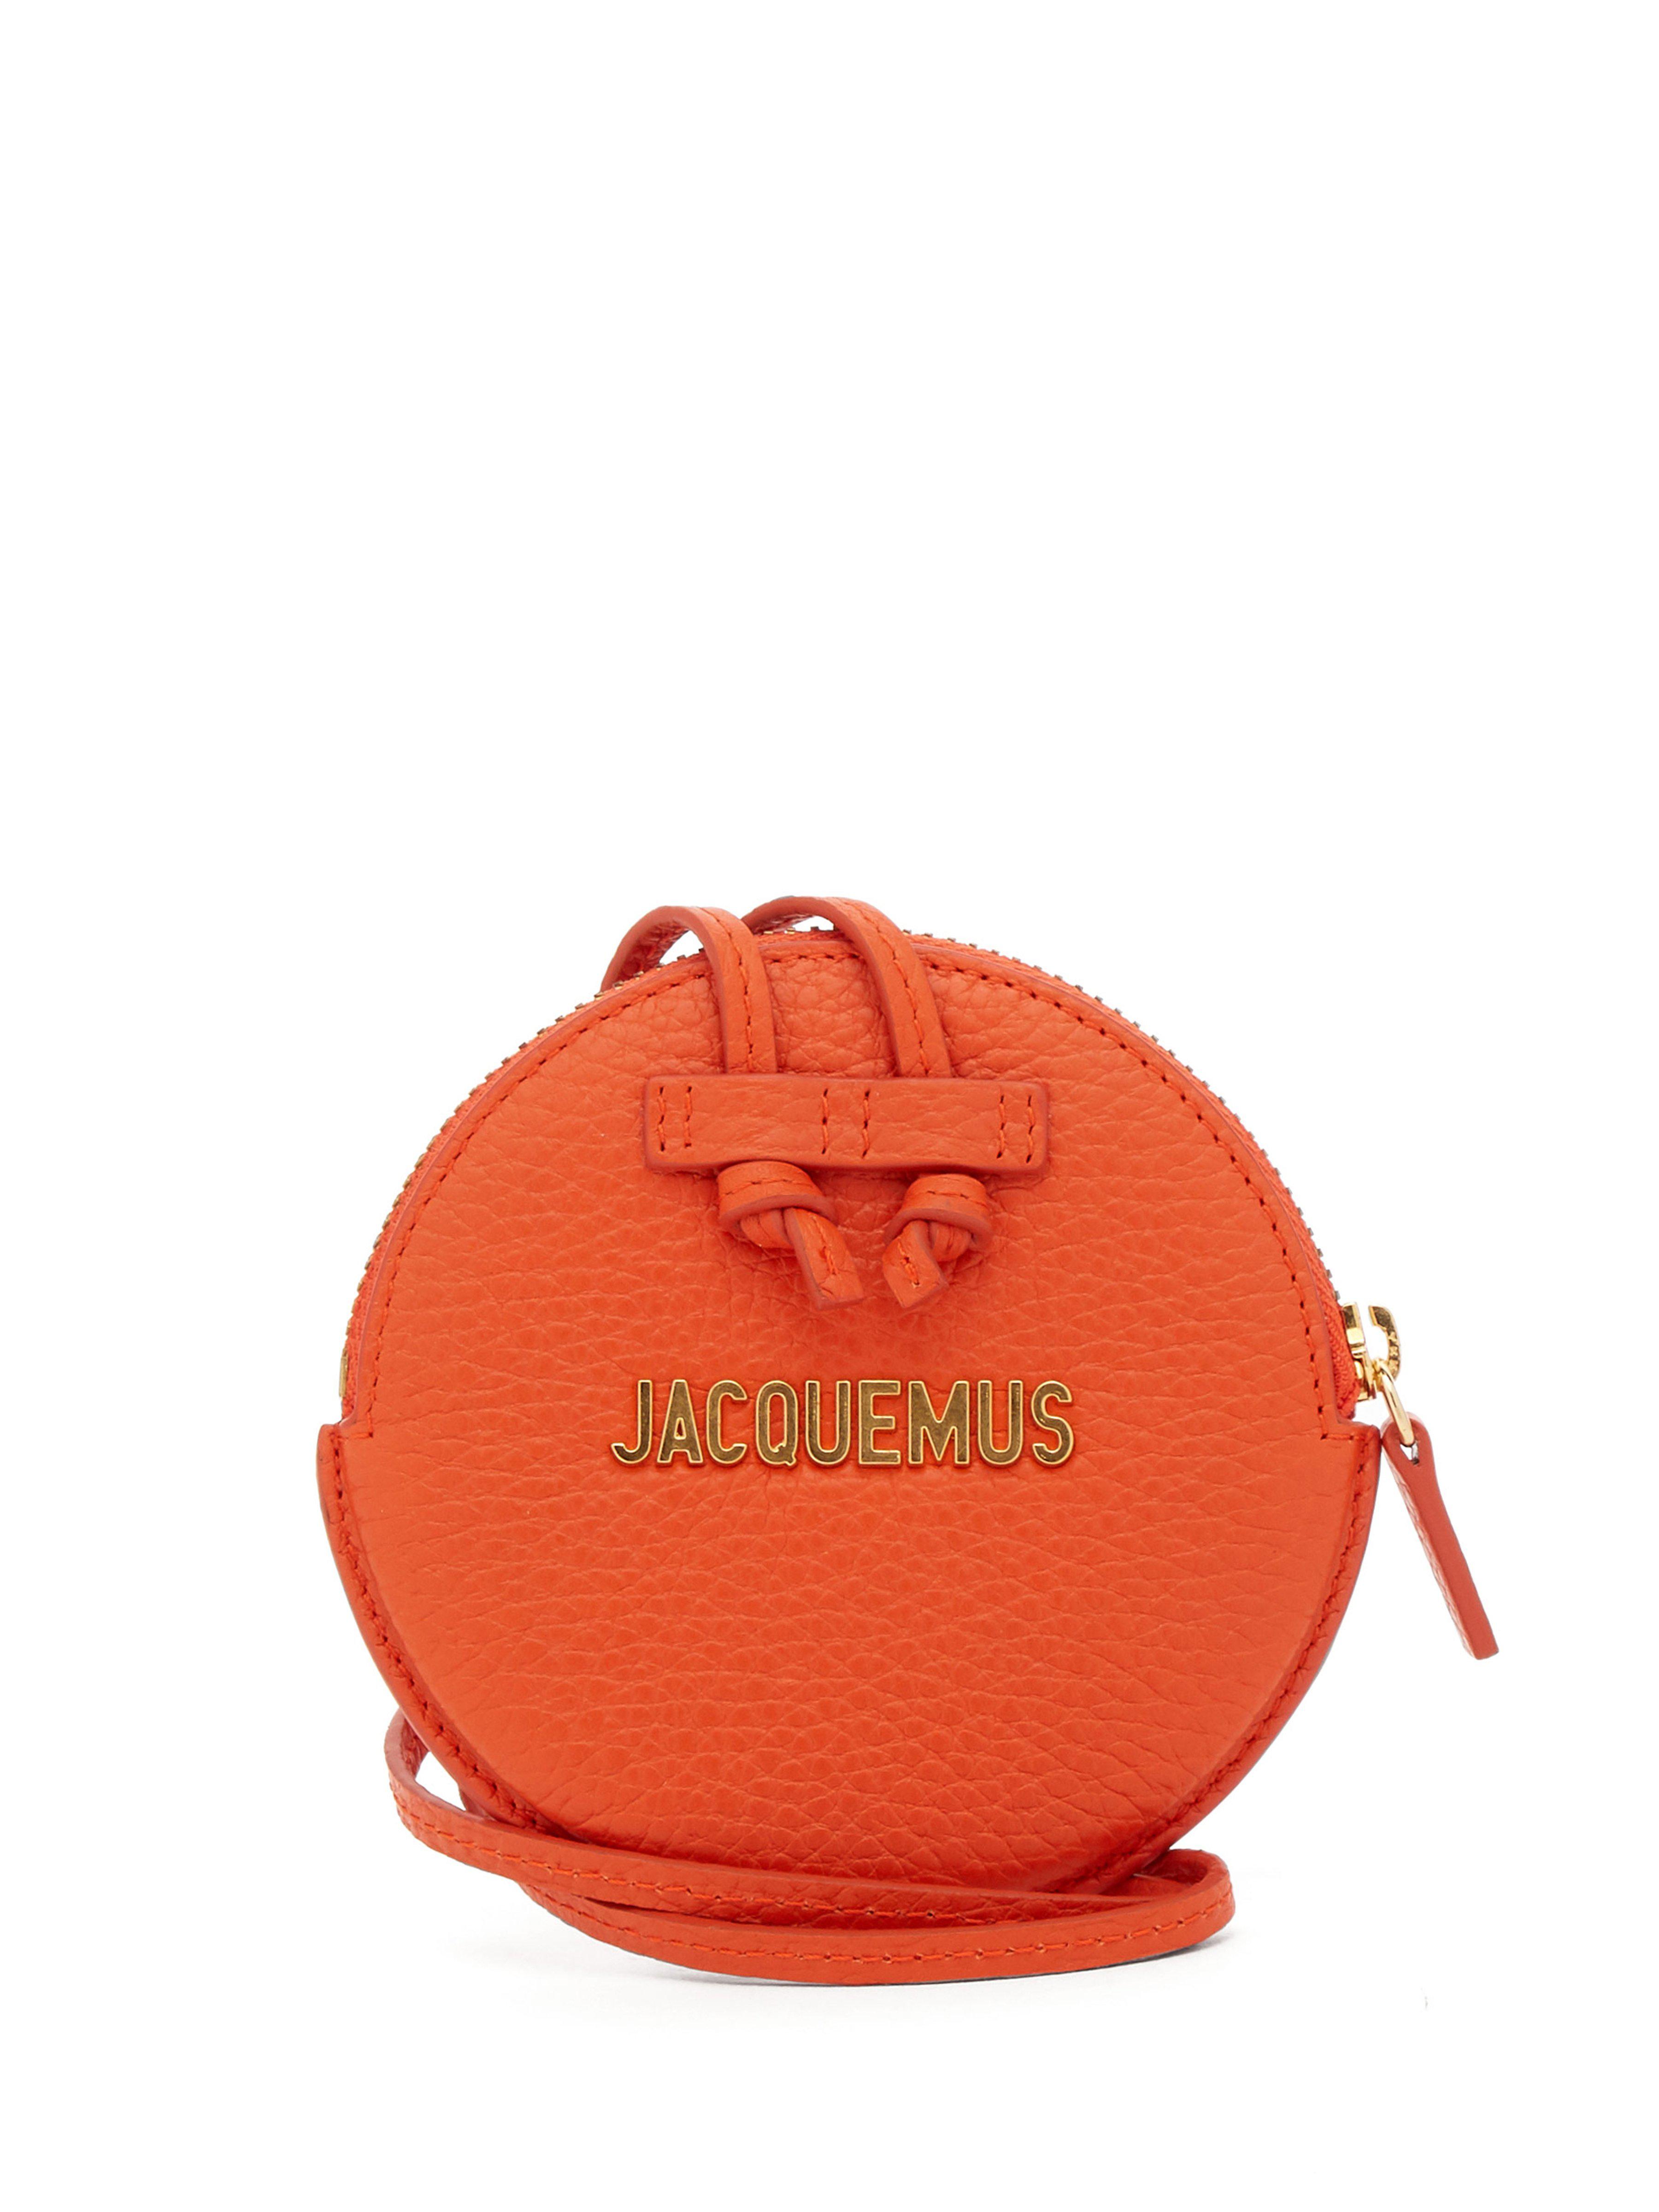 Sac Pitchou Jacquemus Clearance Selling, 64% OFF | asrehazir.com